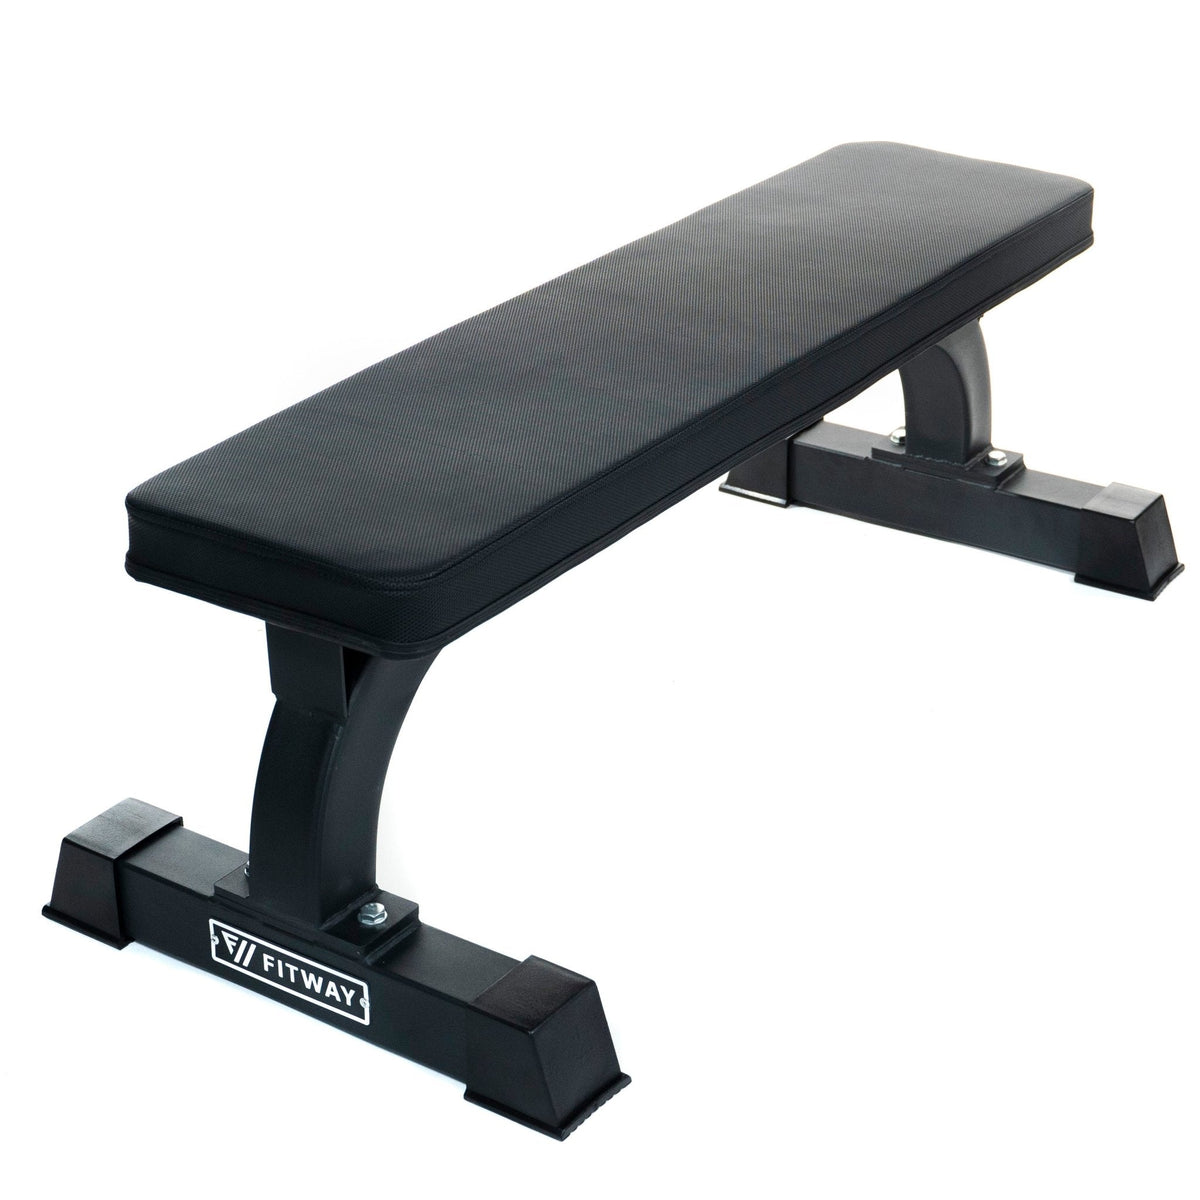 FitWay Equip. Fitway Flat Bench - Fitness Experience